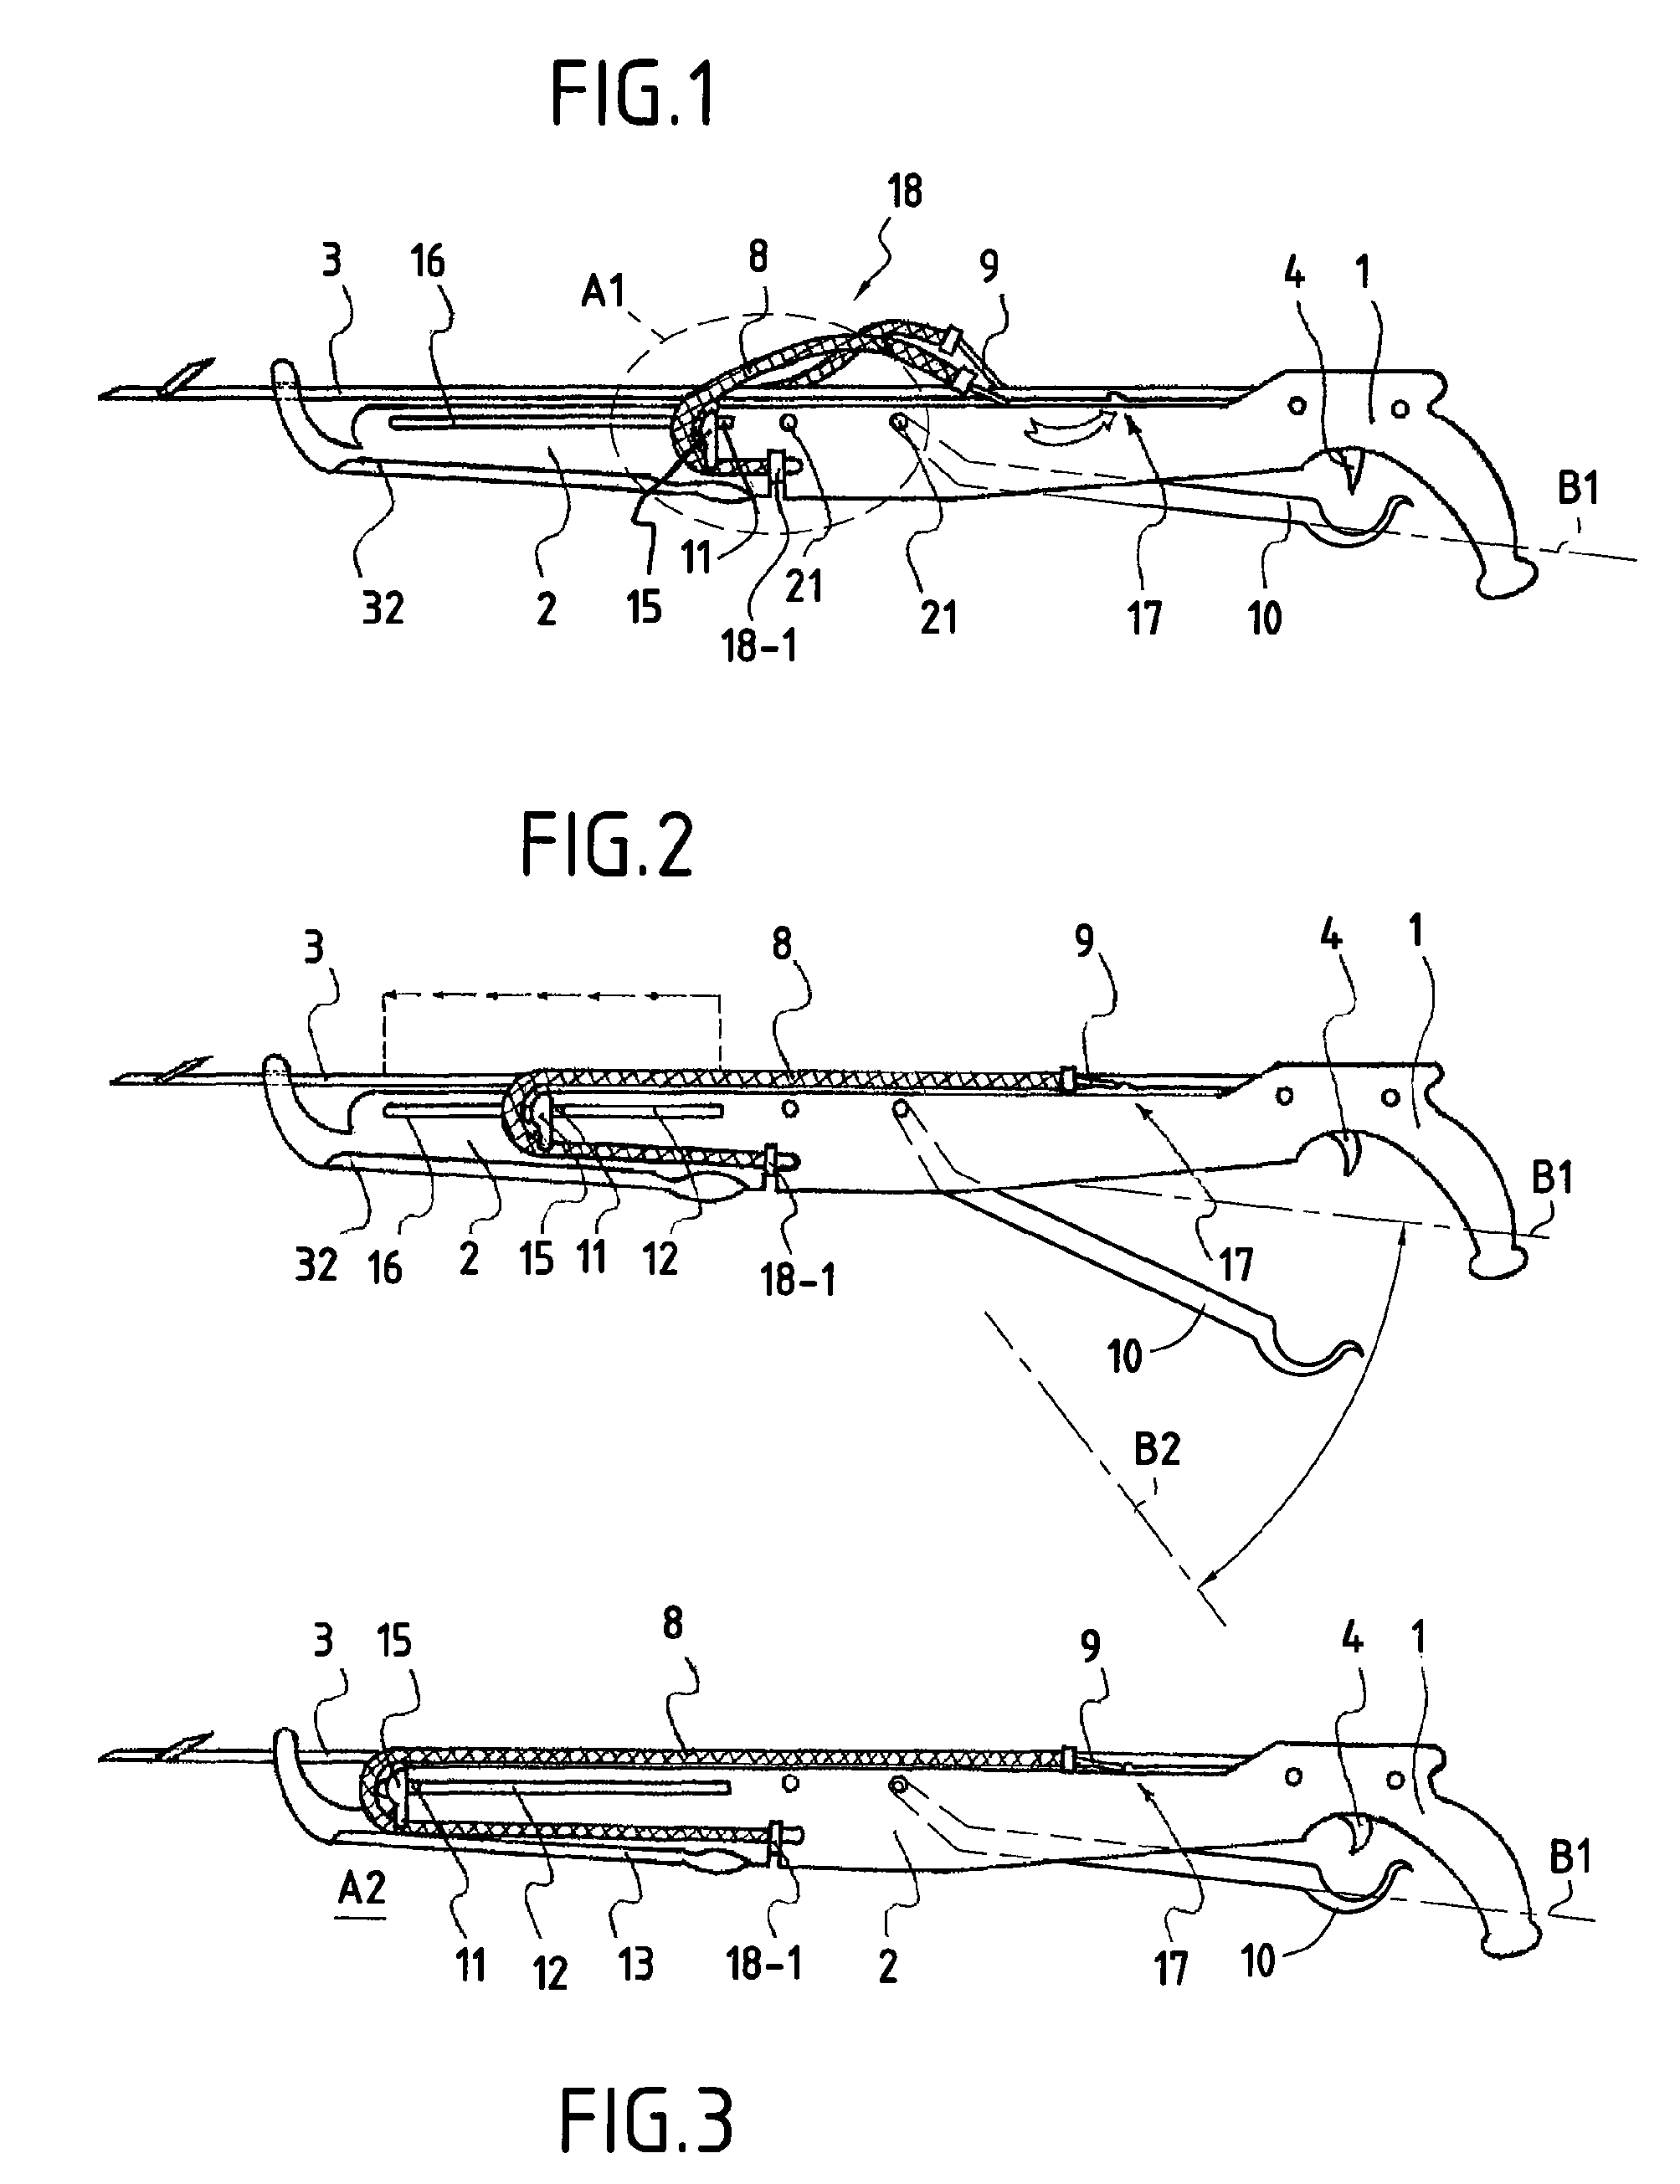 Underwater hunting gun of the crossbow type with effortless string-drawing device and low recoil